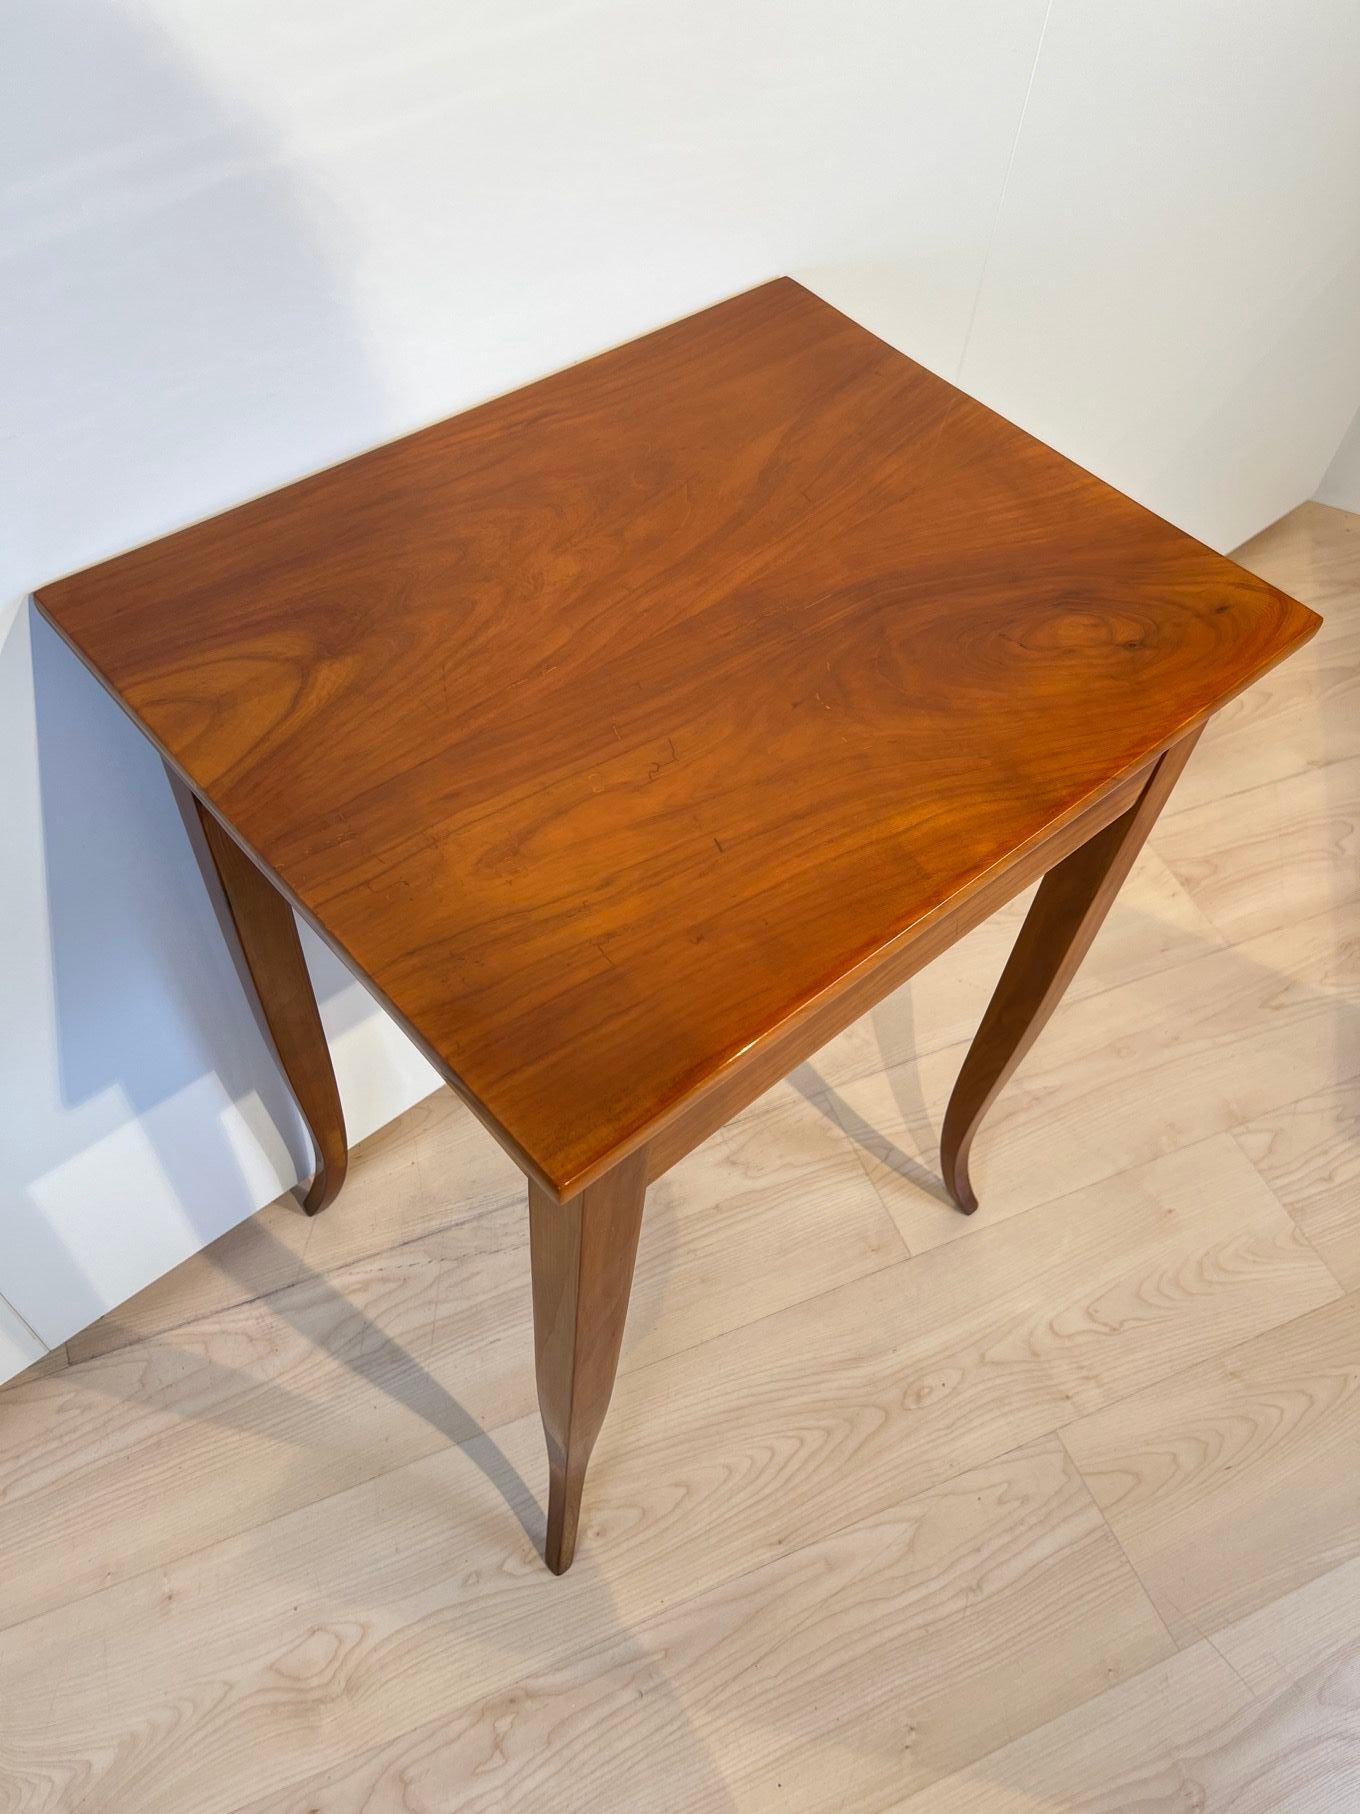 Biedermeier Side Table with Drawer, Cherry Wood, South Germany circa 1825 For Sale 3